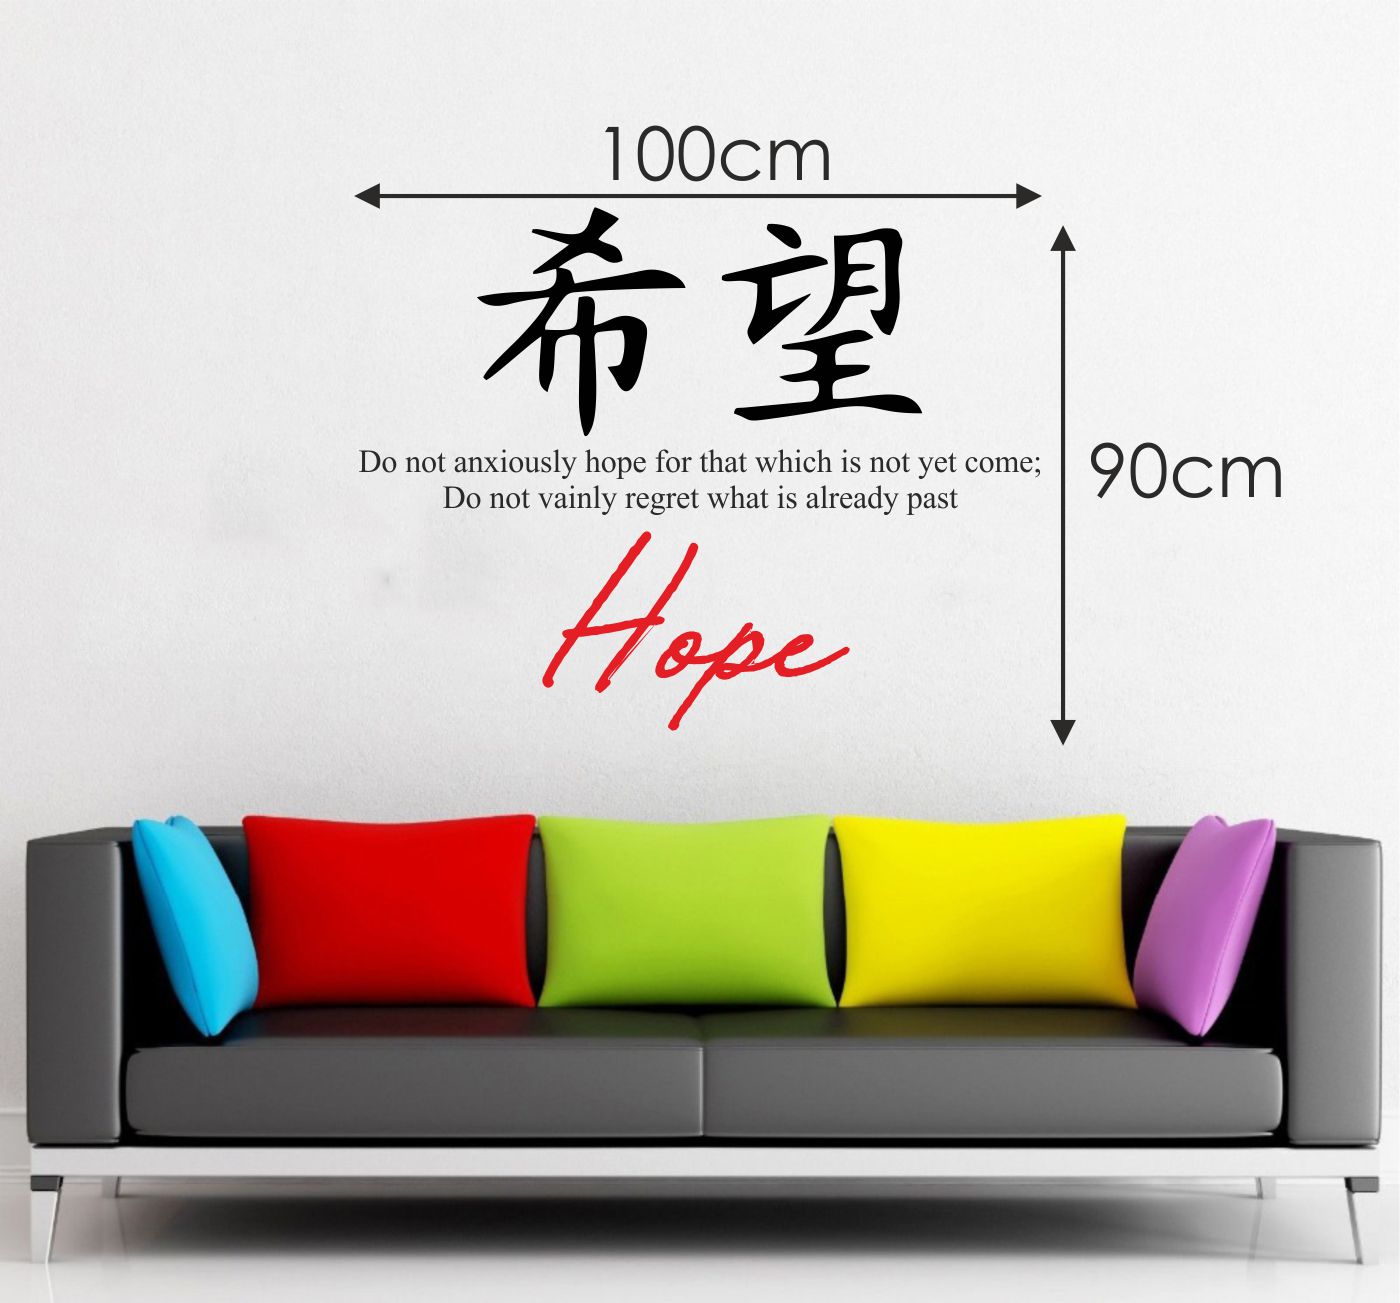 ORKA Chinese Wall Decal Sticker 9  